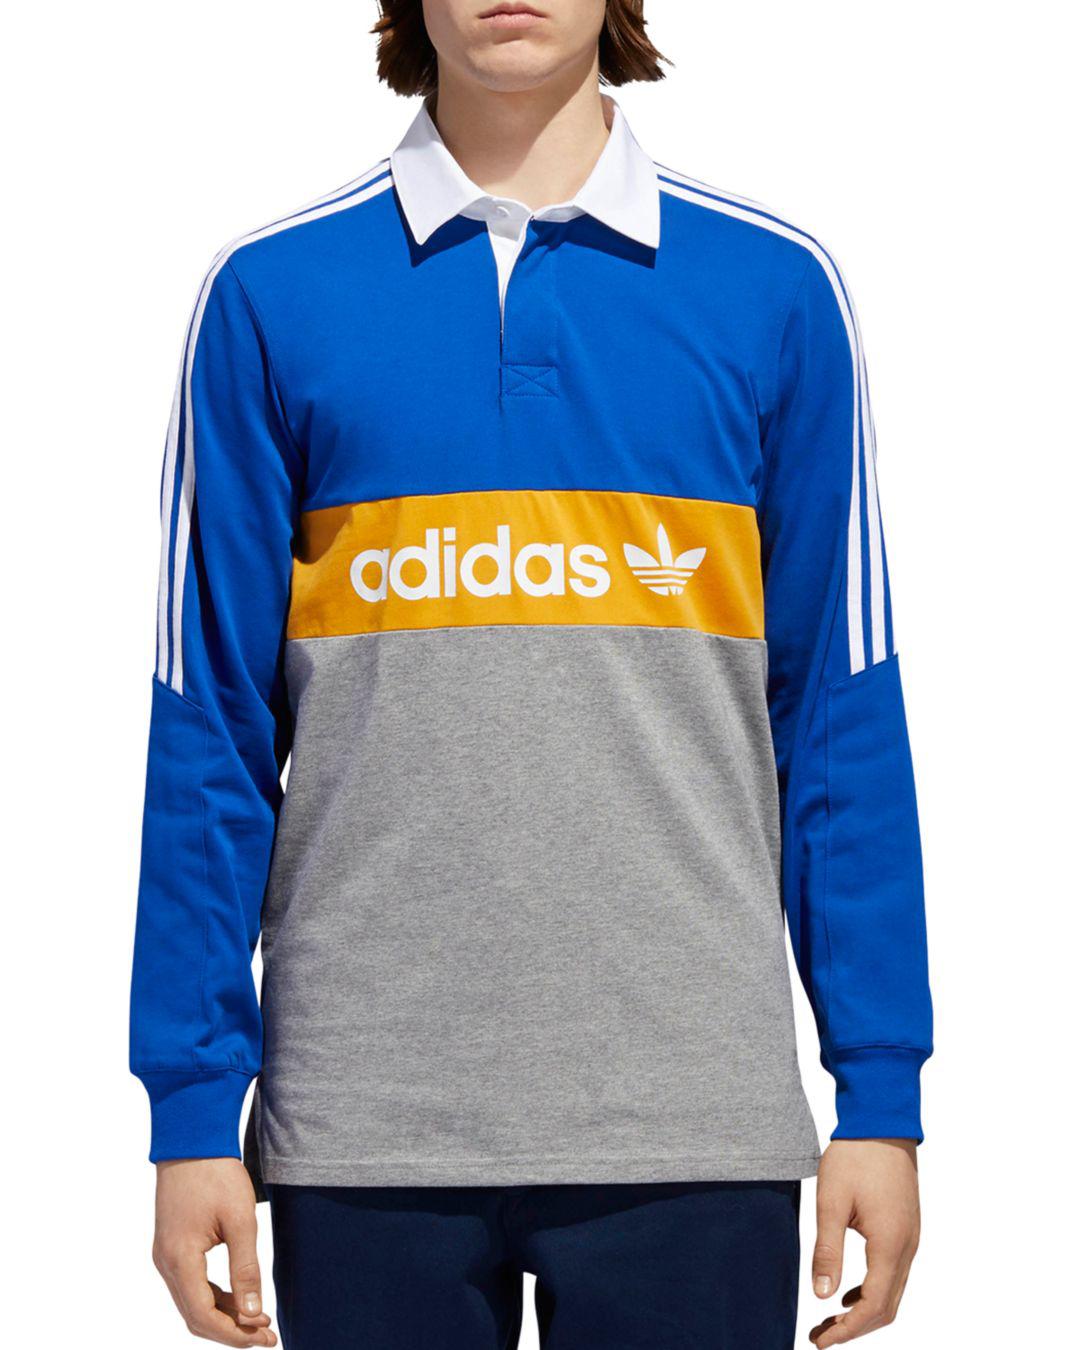 adidas Originals Heritage Rugby Polo Shirt in Blue for Men - Lyst